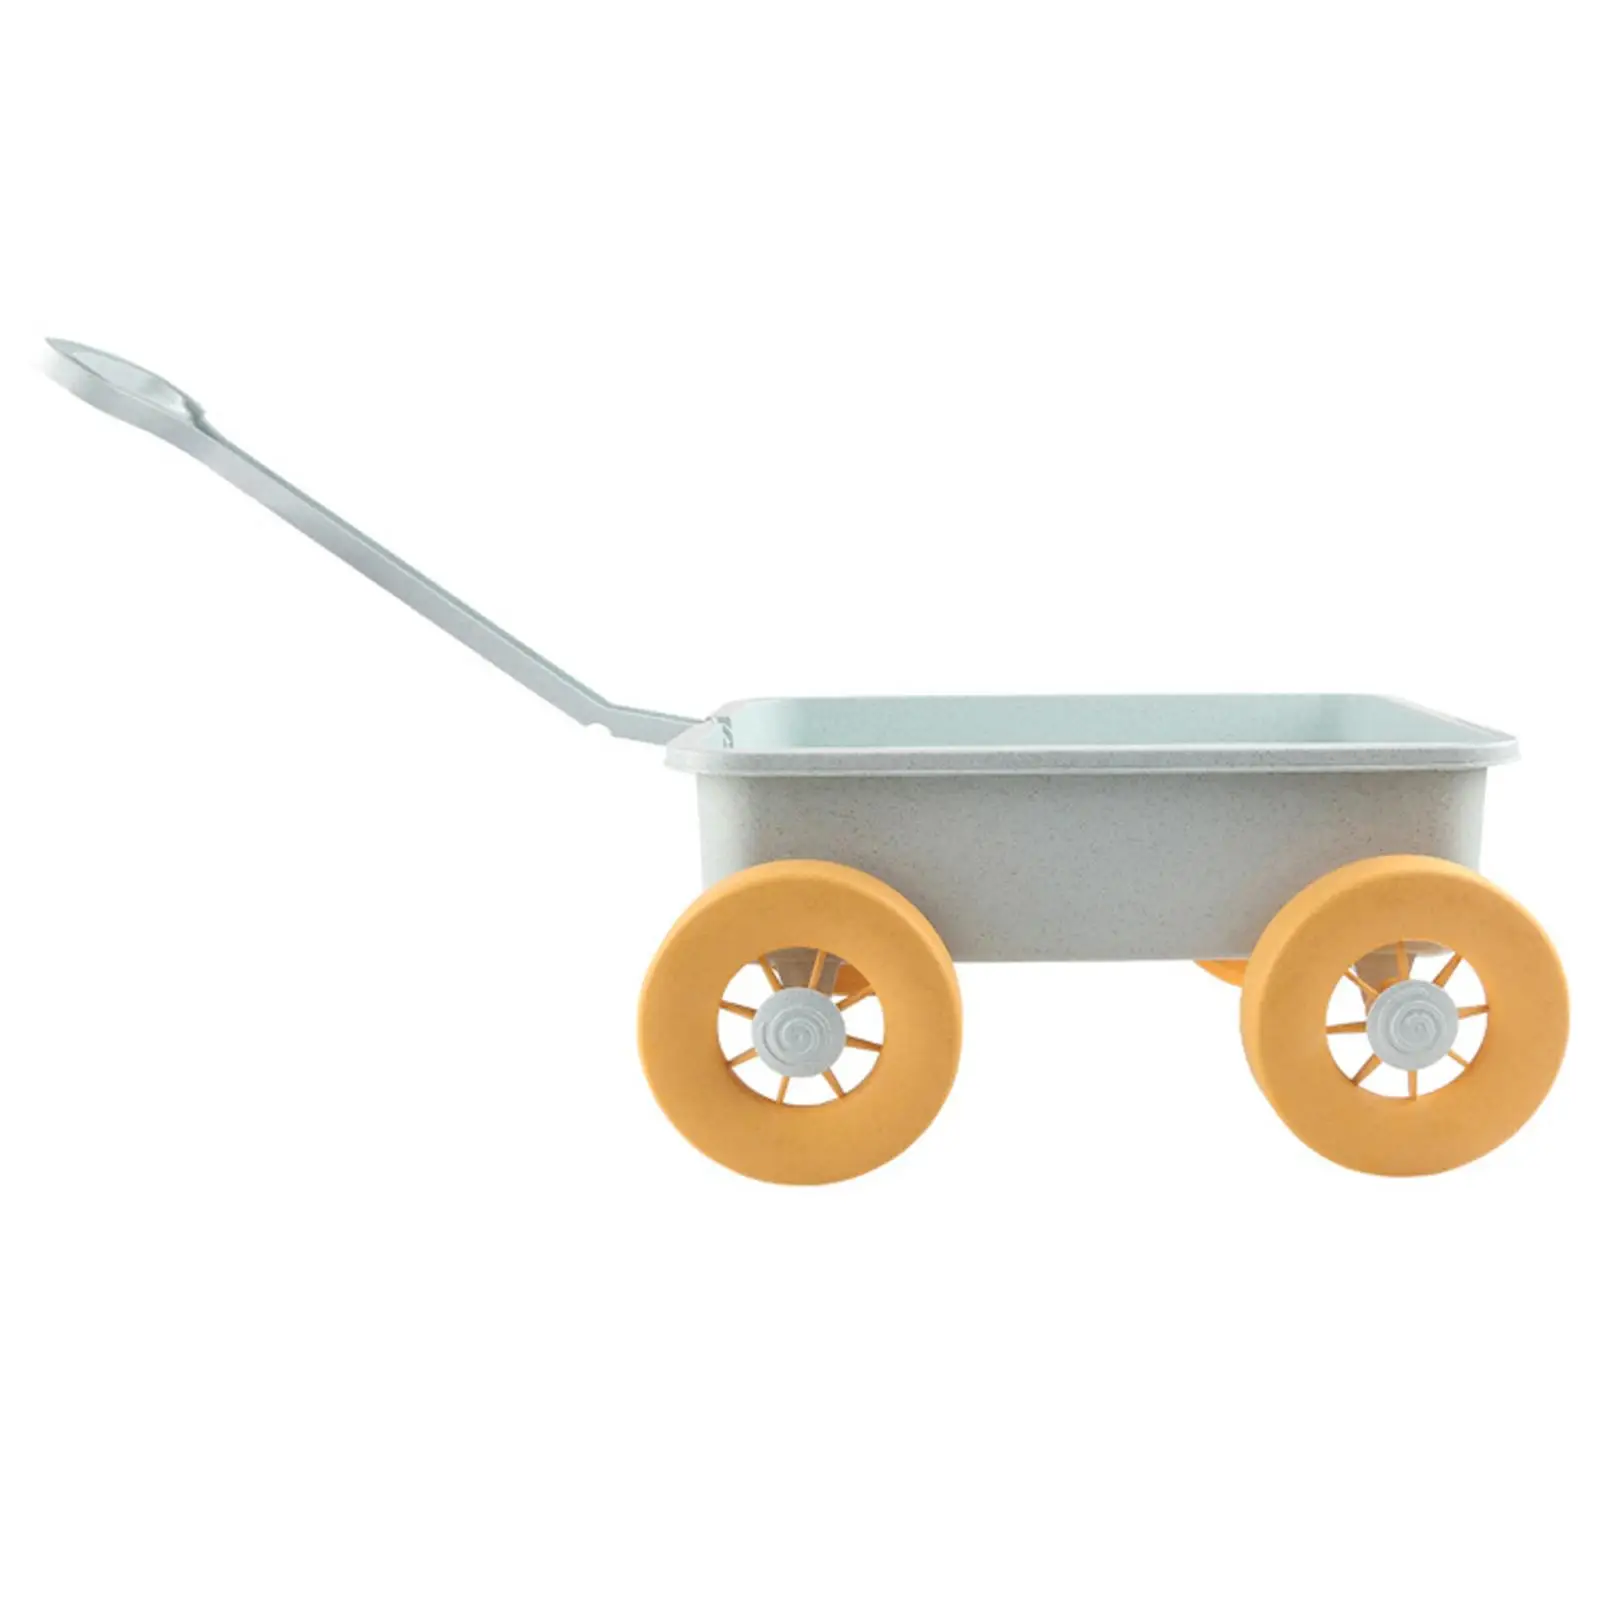 Play Wagon Beach Toys Vehicle Small Wagon Toy Wagon Tools Toy for Holding Small Toys